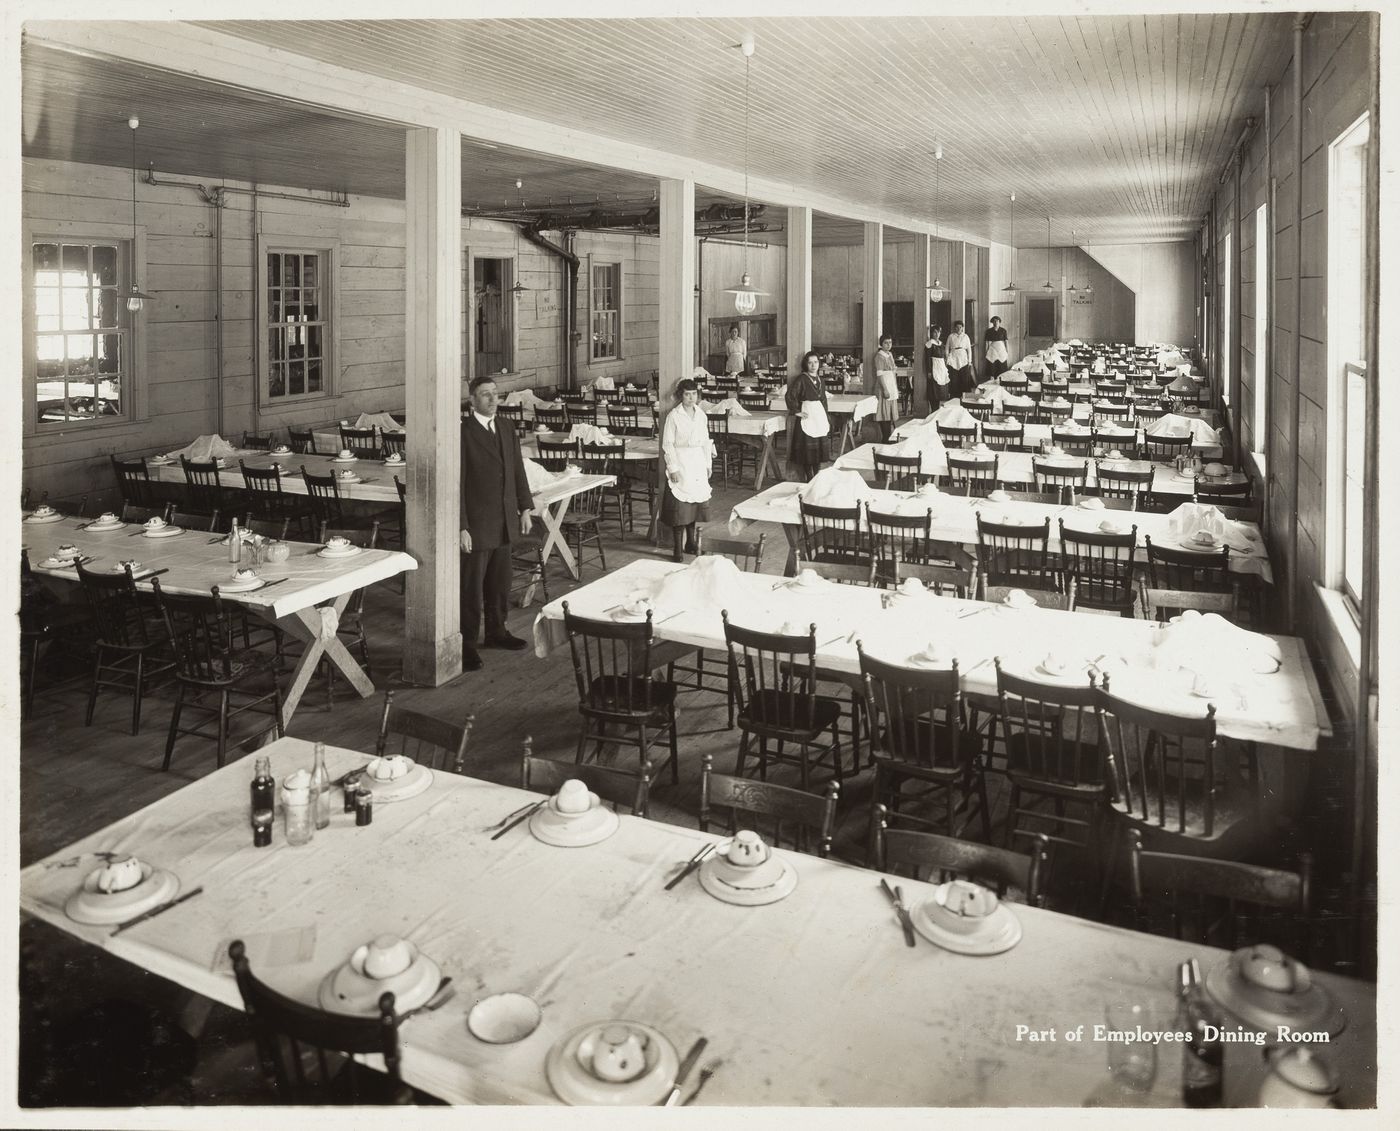 Interior view of employees dining room at the Energite Explosives Plant No. 3, the Shell Loading Plant, Renfrew, Ontario, Canada